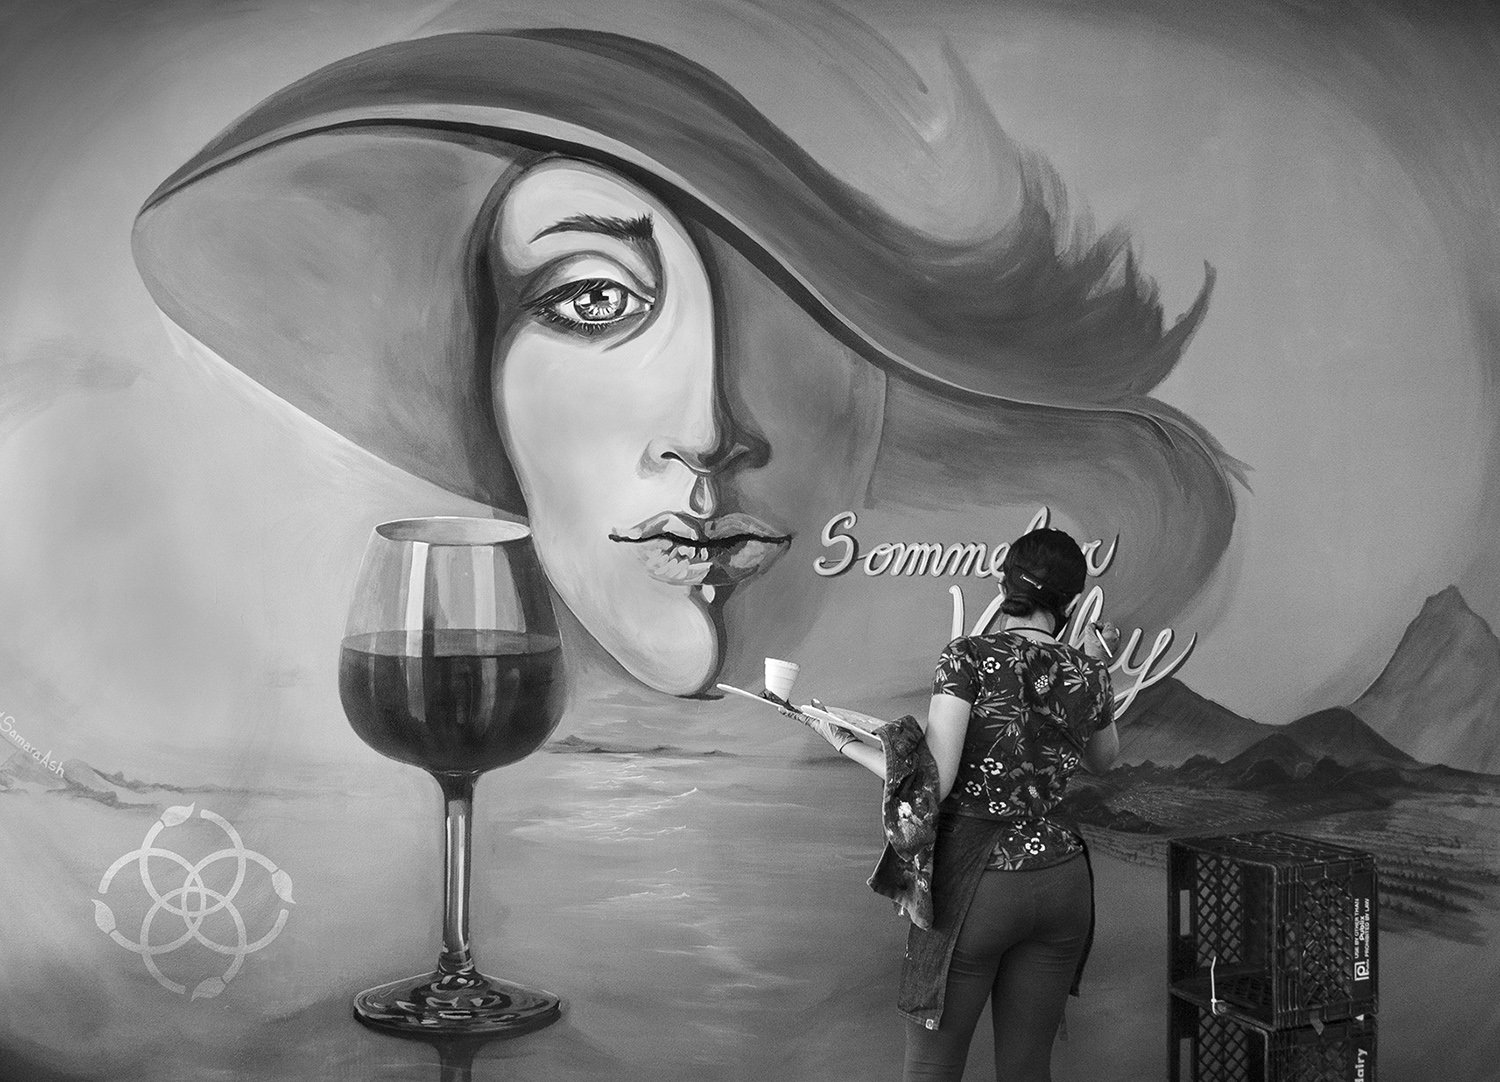 Mural commissioned by Sommelier Valley, North Miami, Florida USA.